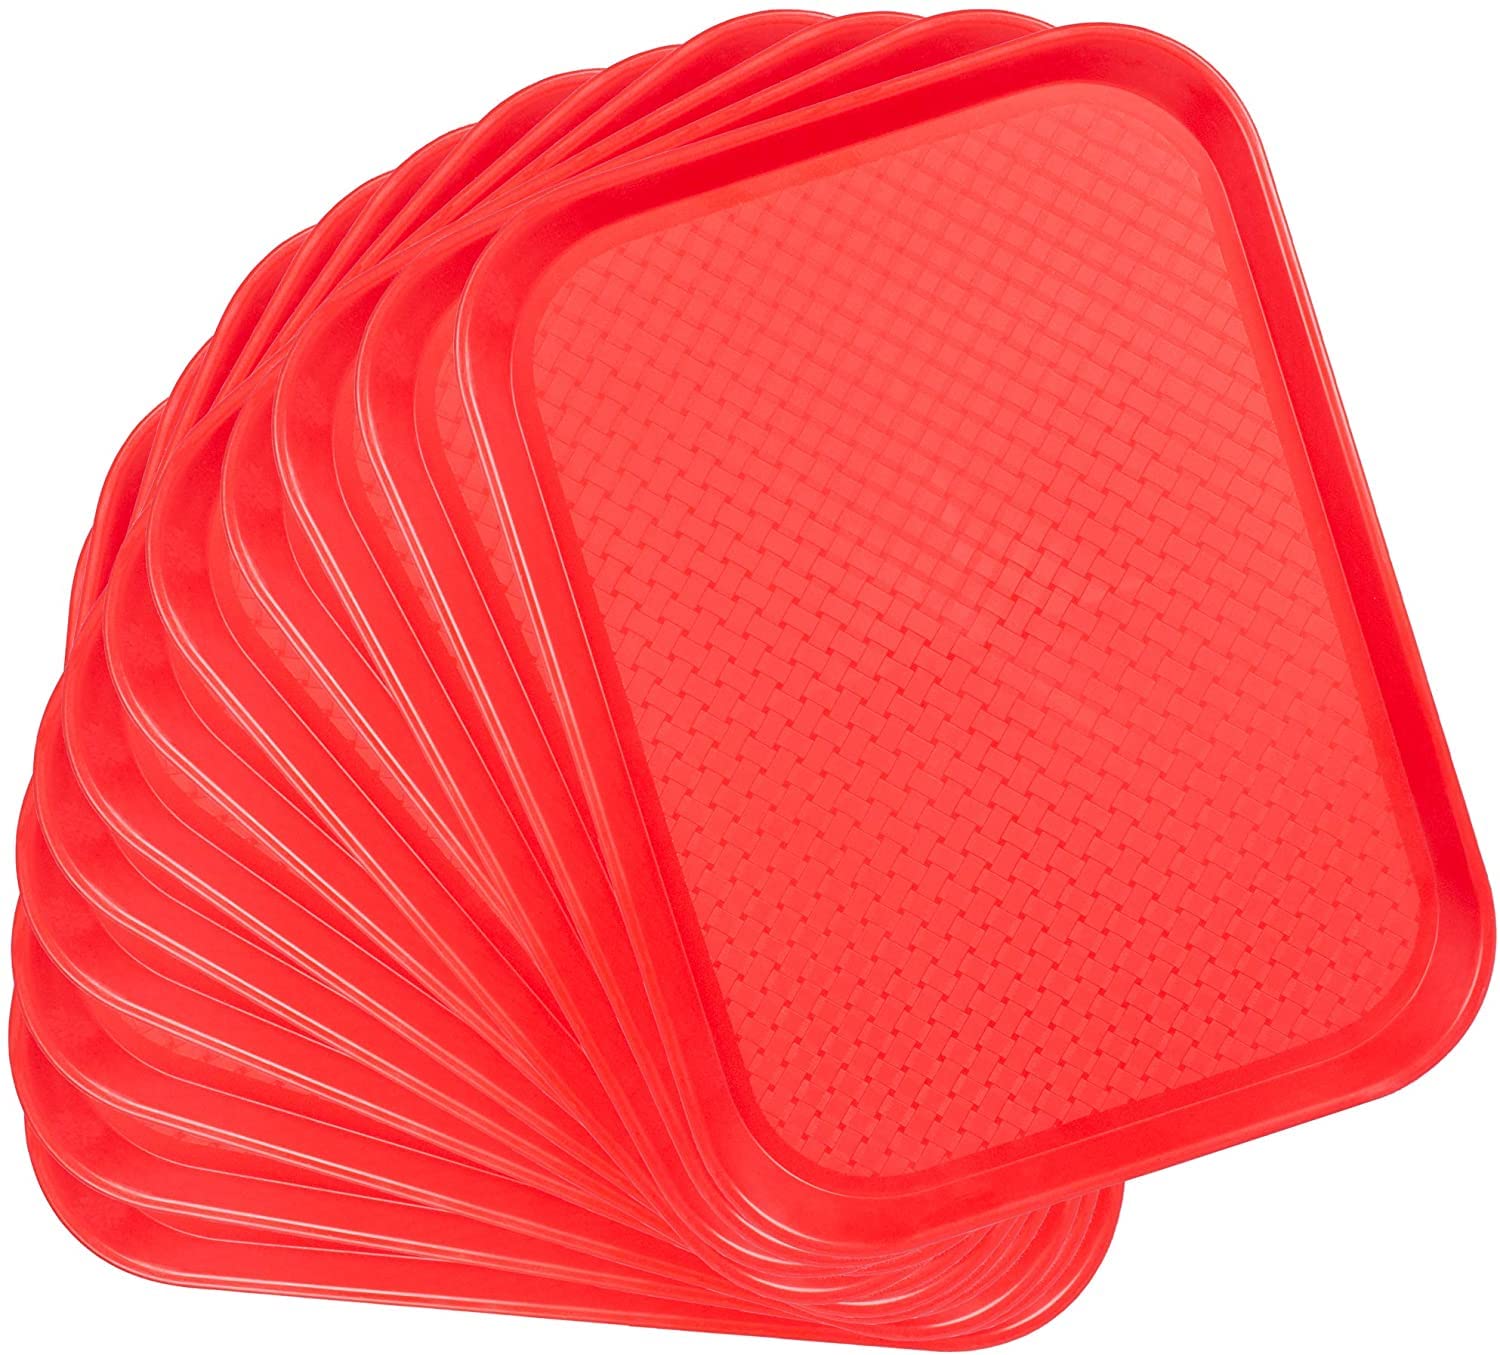 NJ Plastic Serving Platter Large Tray Unbreakable Snacks Tea Serving Tray Red Drink Breakfast Tea Dinner Coffee Salad Food for Dinning Table Home Kitchen (16 X 12 Inches) : Red 6 Pcs.